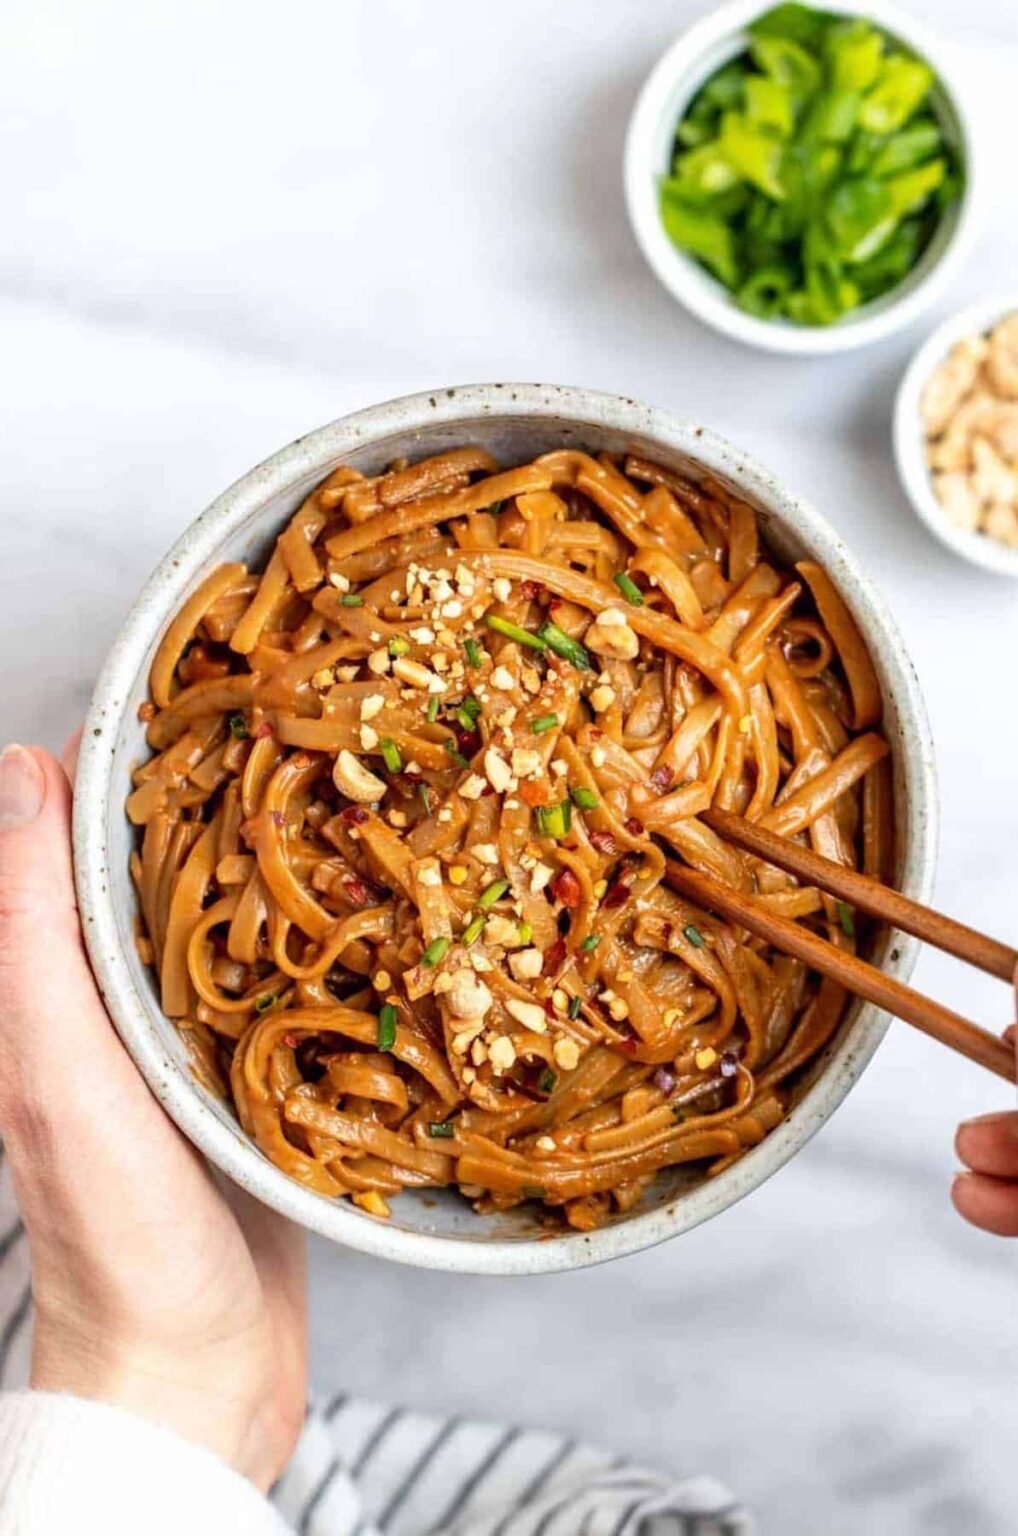 15 Minute Spicy Peanut Butter Noodles | Eat With Clarity